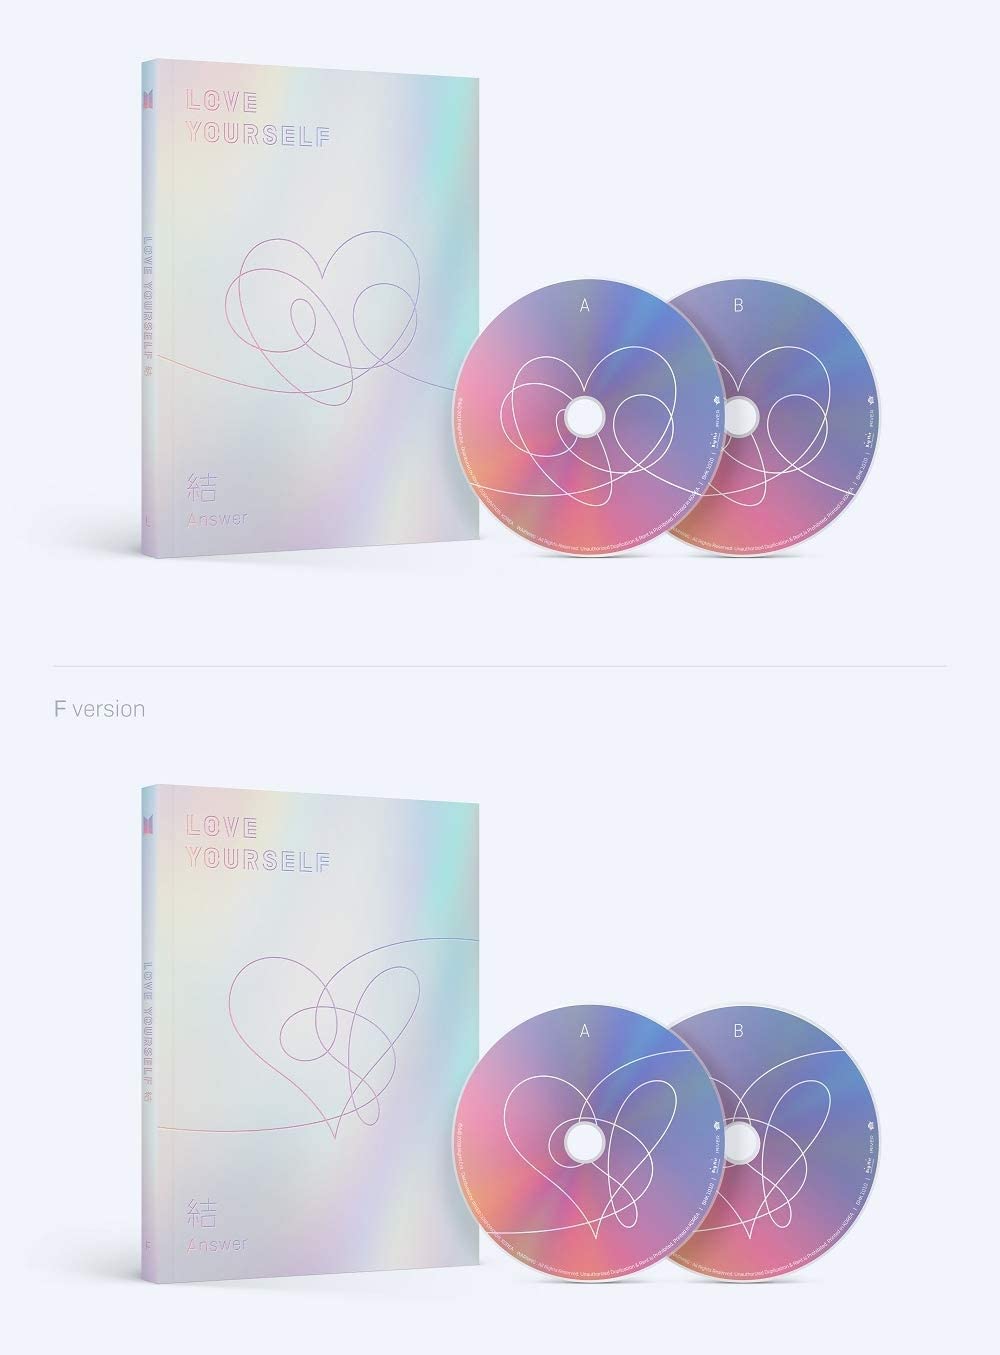 2 CD
1 Photo Book (116 pages)
1 Mini Book (20 pages)
1 Photo Card (random out of 28 pages)
1 Sticker Pack